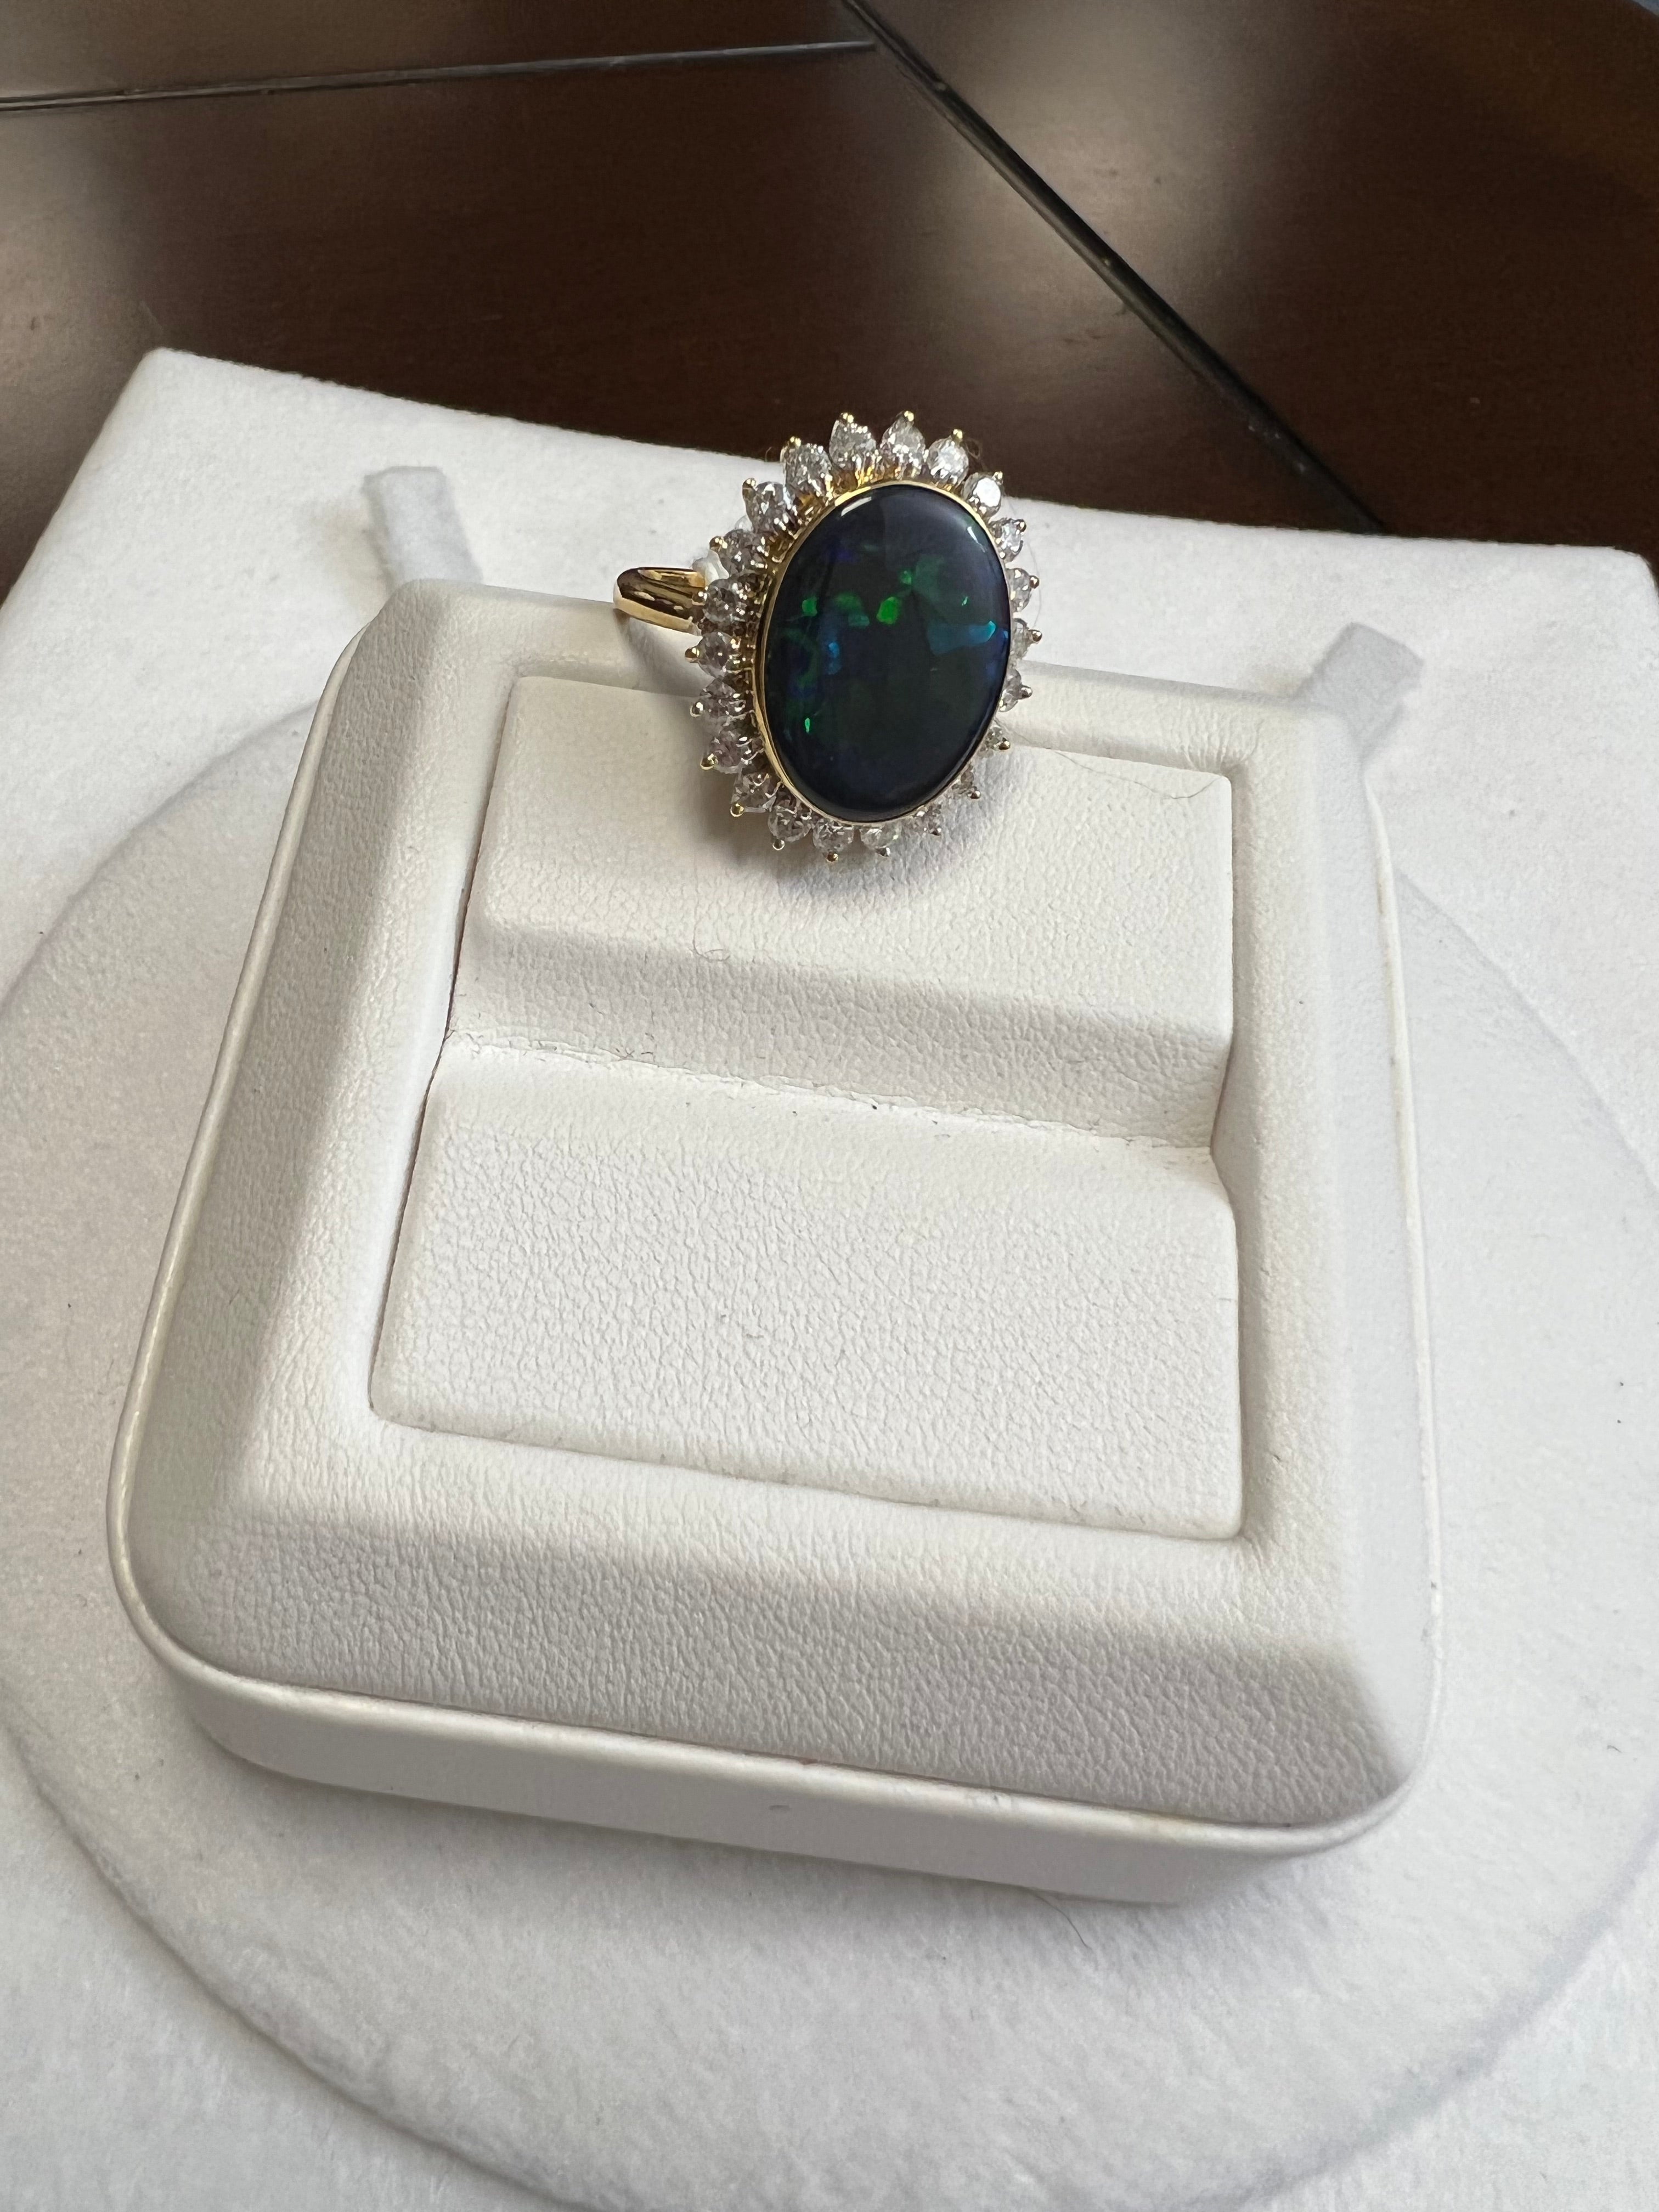 One lady's black opal in blue-green fire color. Average saturation scale with a flash fire pattern. Brightness of fire is very bright with cabochon, oval shape. Weight is 7.50 carats. 22 round brilliant cut diamond measuring 2.2 mm. Total weight is